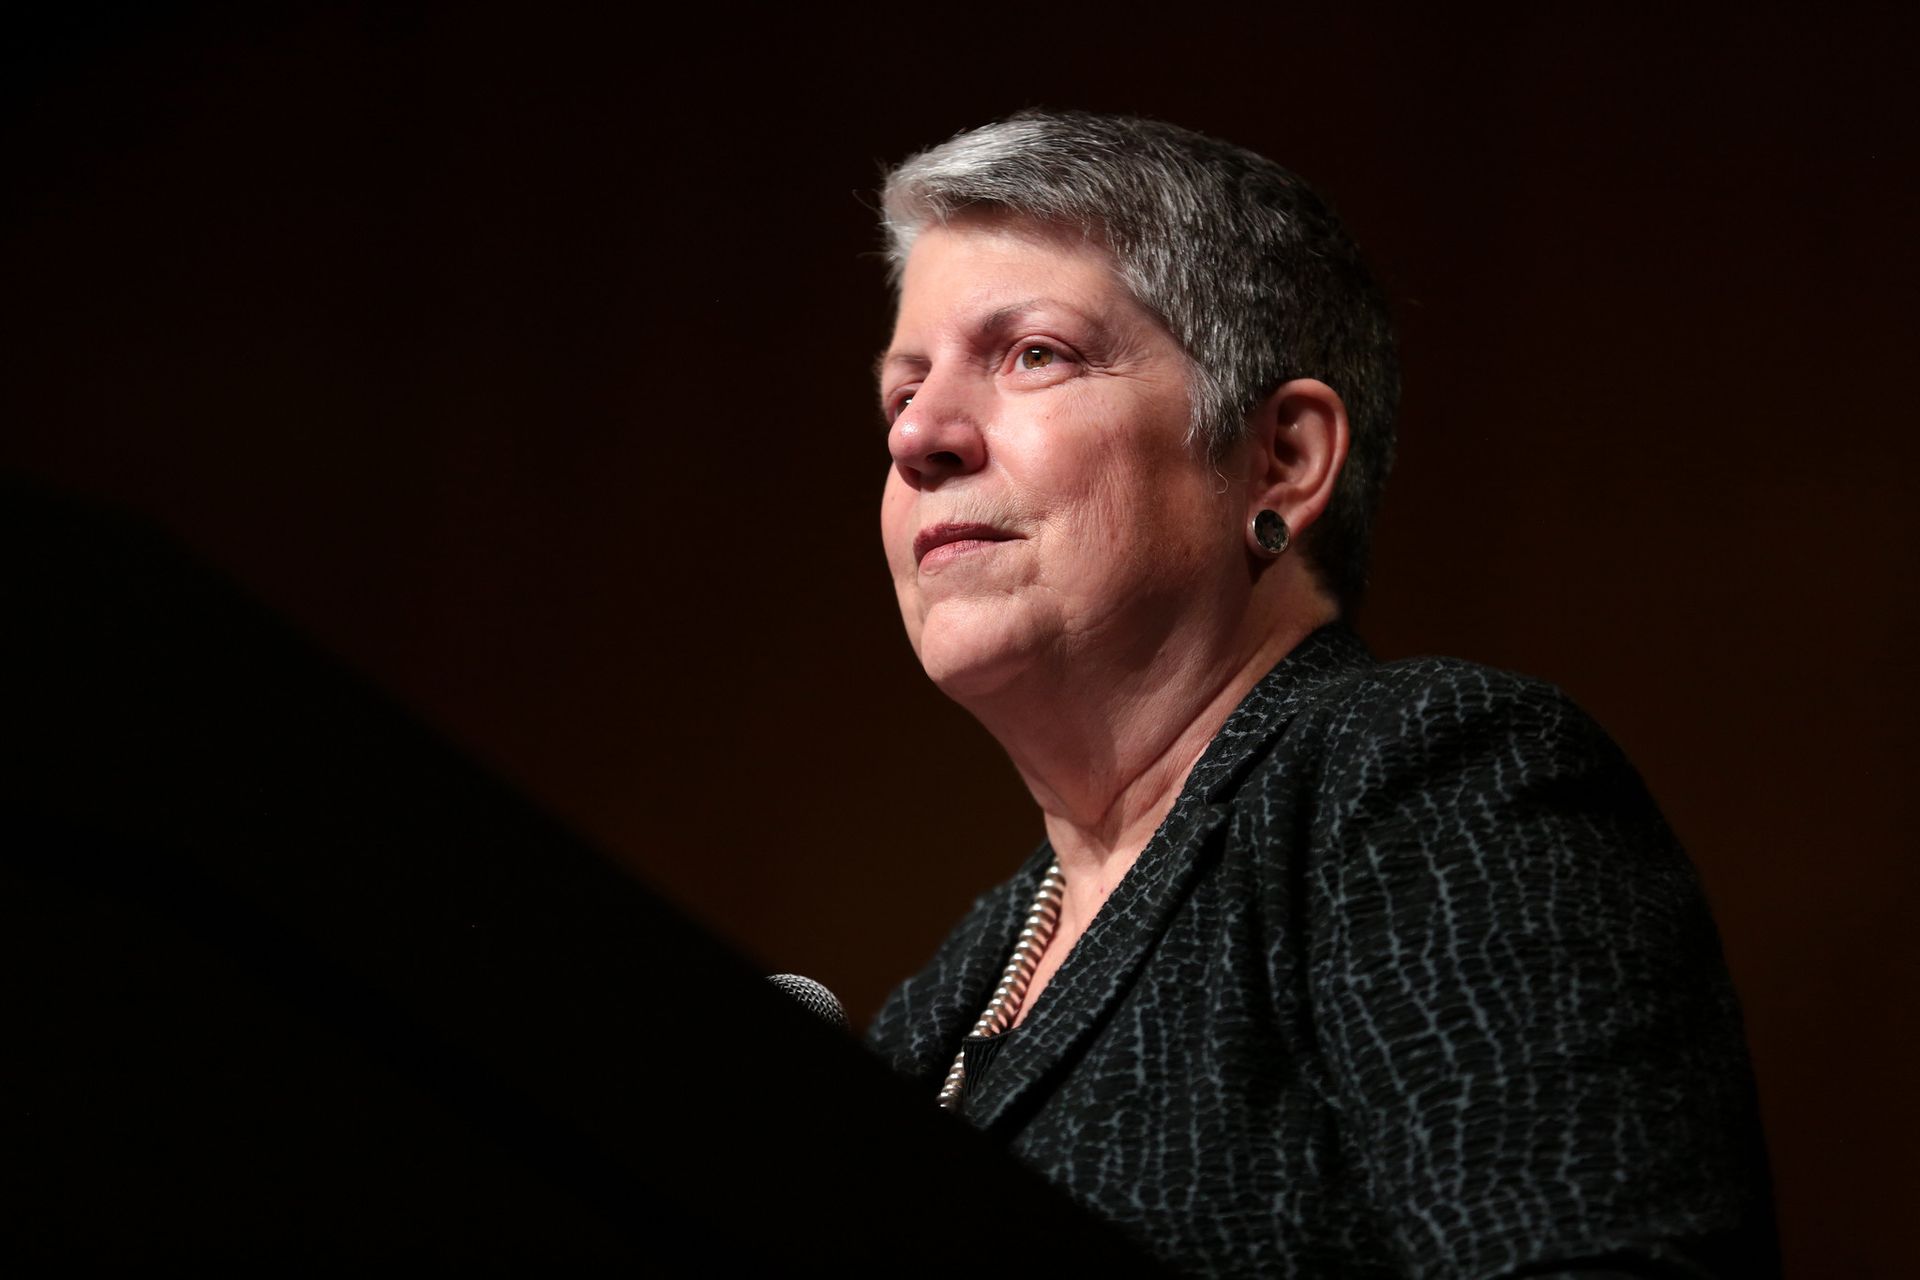 UC President Janet Napolitano Announces Decision To Step Down In 2020